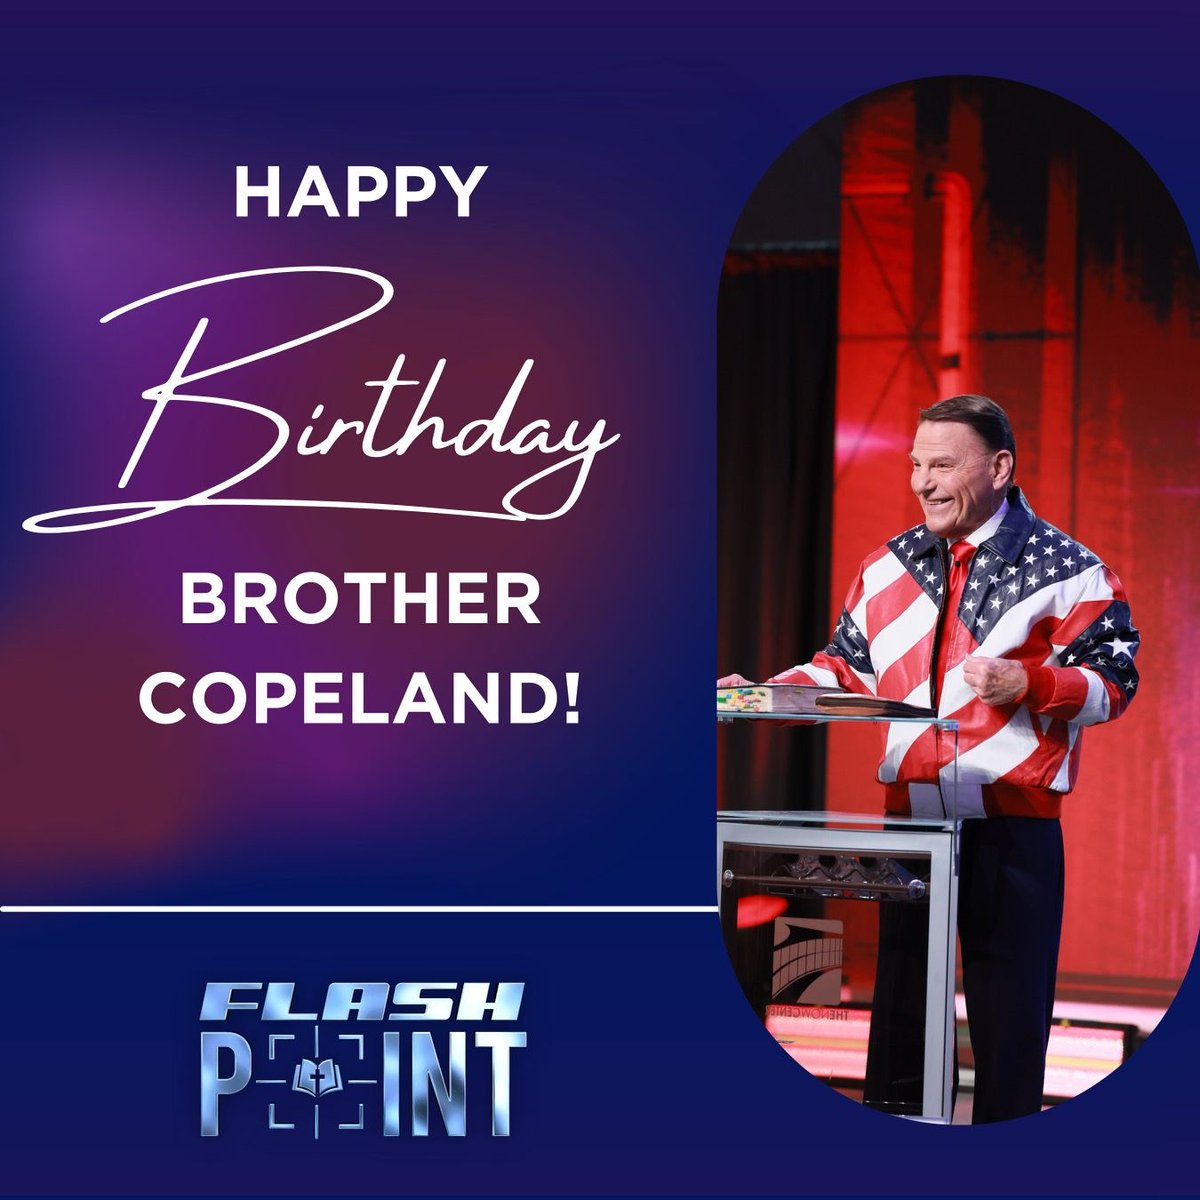 Brother Copeland, we take this time to honor you and say, “Thank you!” for all the time and dedication to this ministry. You have inspired and encouraged so many, and we celebrate you today! HAPPY 87th BIRTHDAY!

#happybirthday #celebrate #kennethcopeland #flashpointarmy #victory